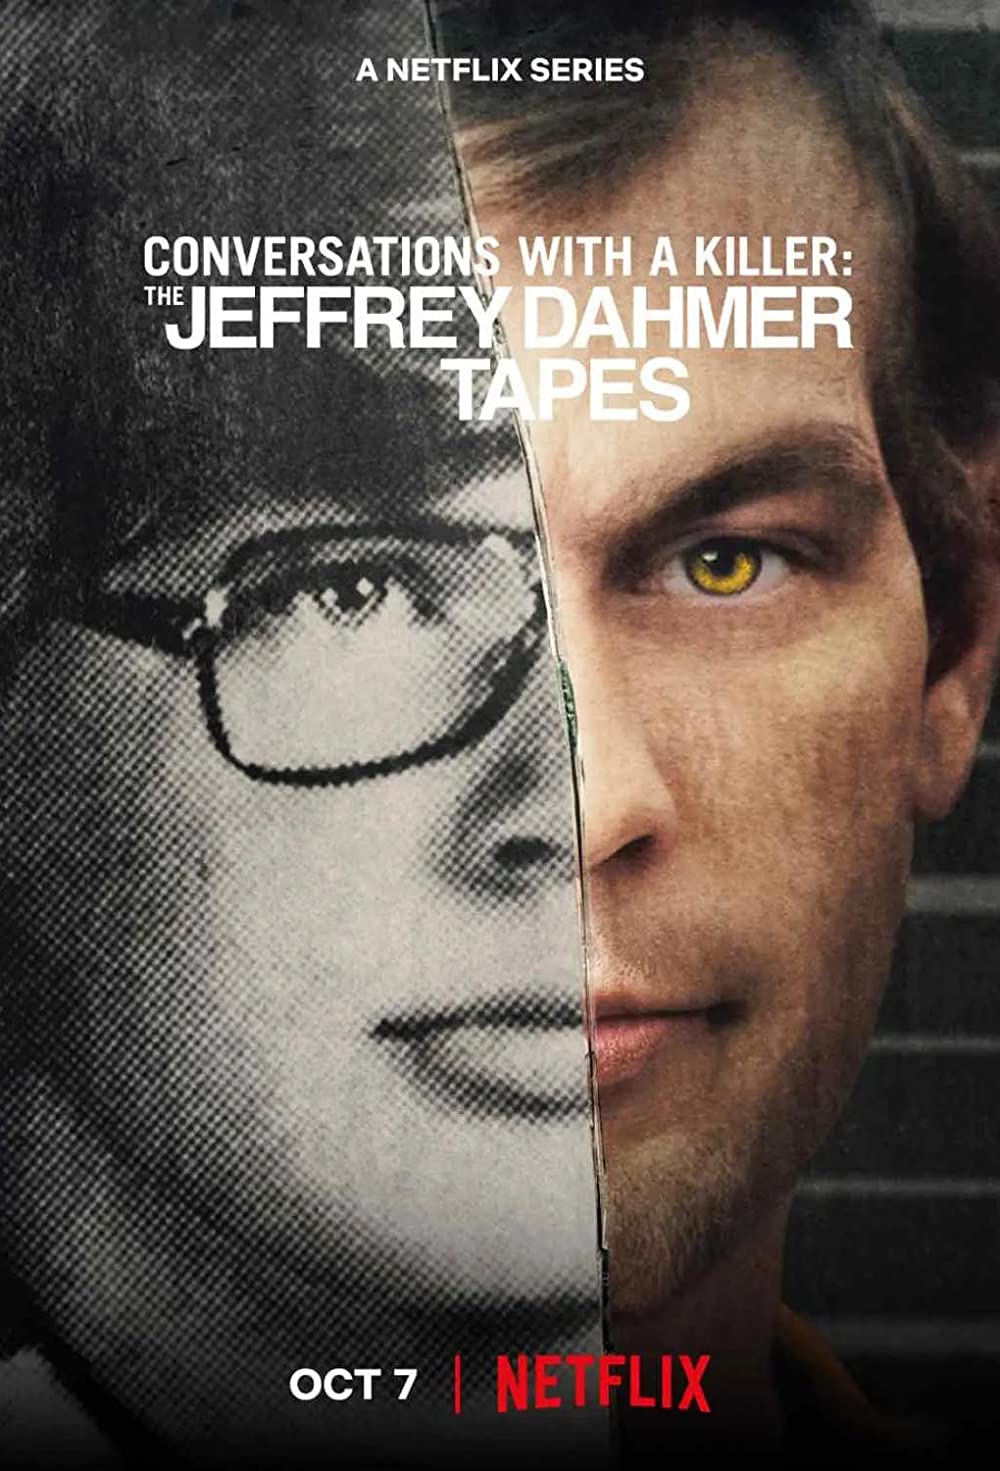 Conversations With a Killer: The Jeffrey Dahmer Tapes.